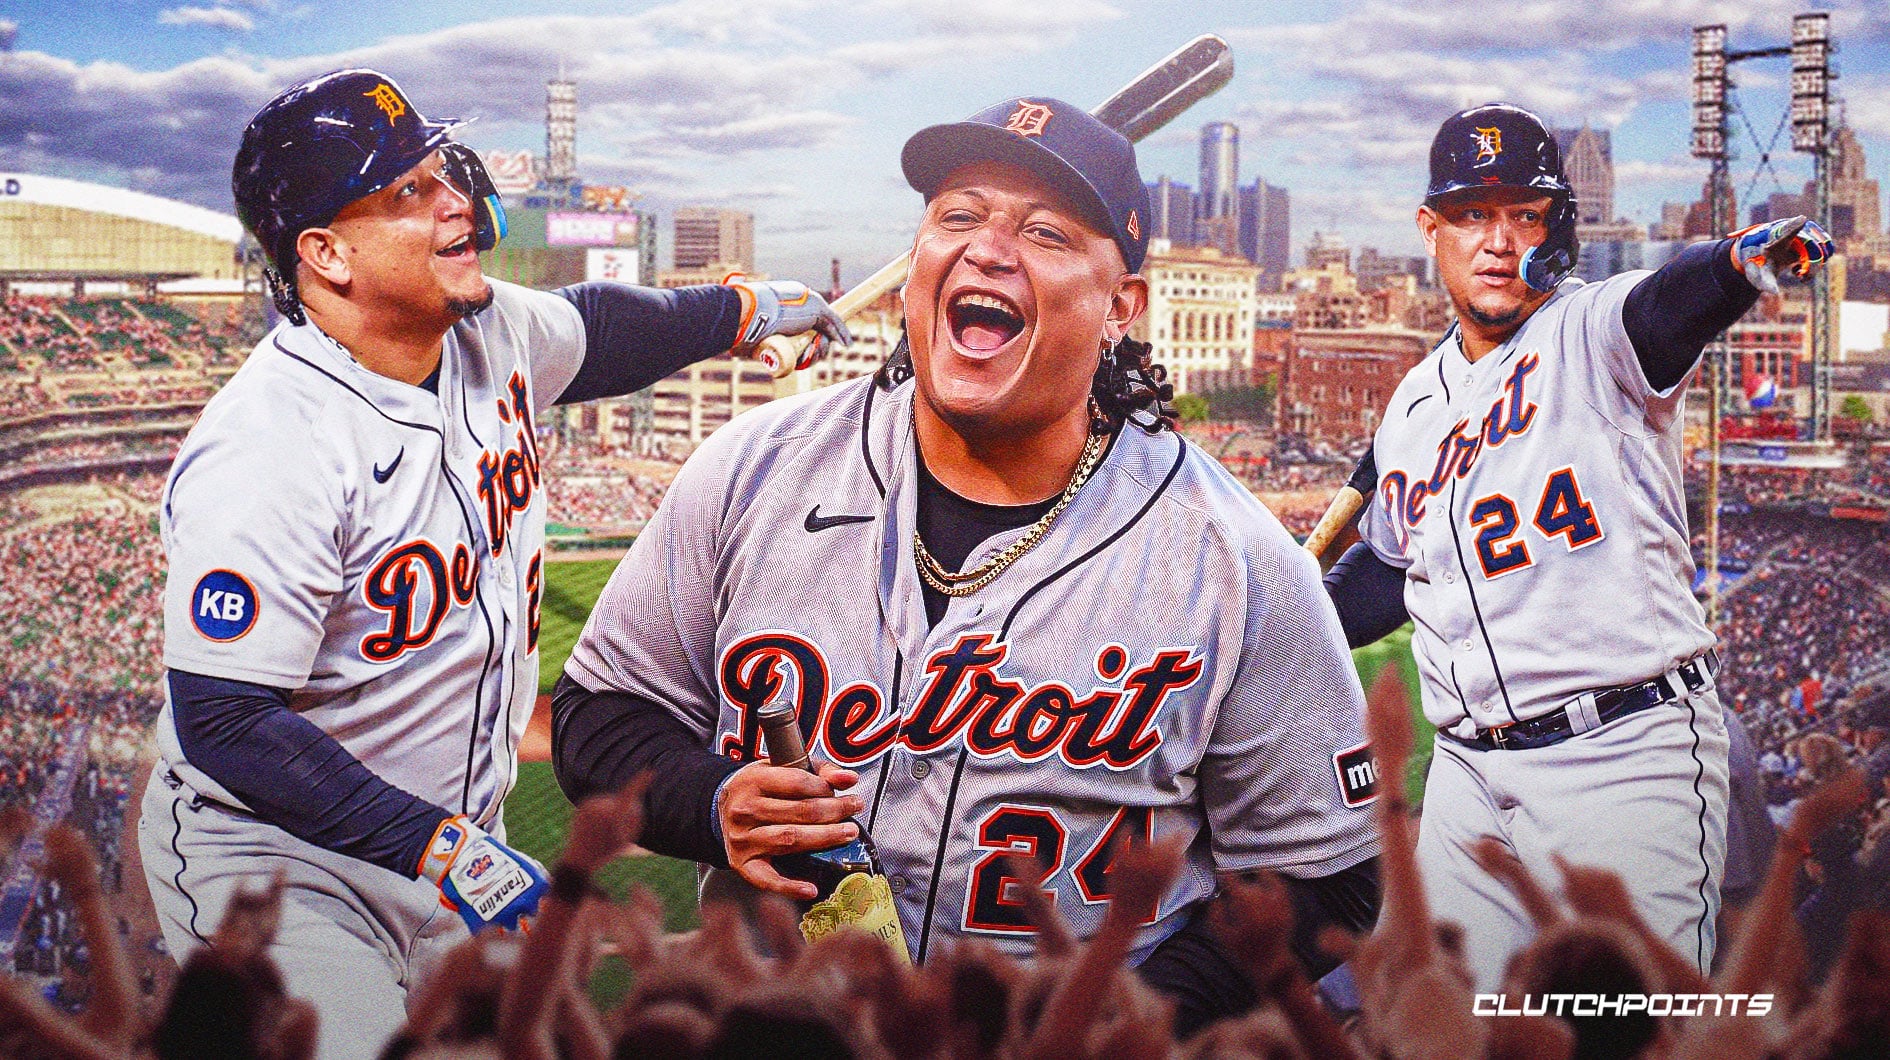 Miguel Cabrera's next move after retirement will excite Tigers fans